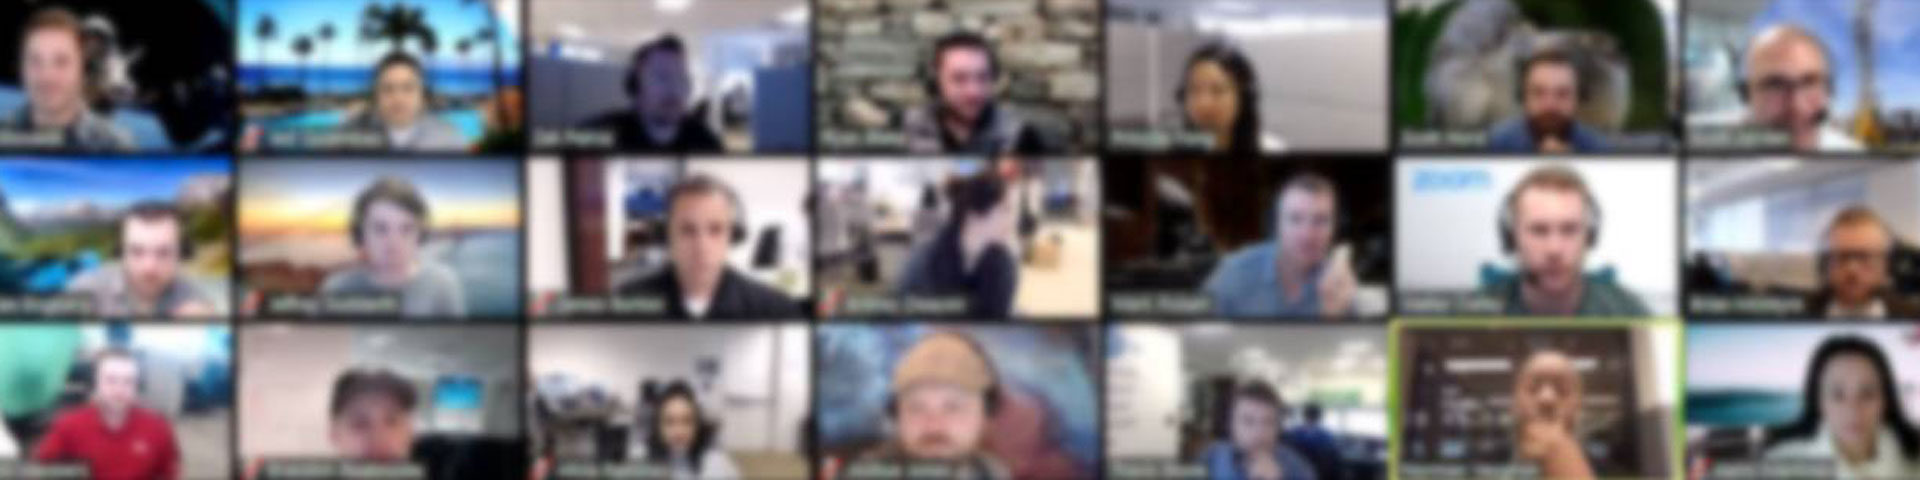 Sample screenshot of participants in a Zoom meeting